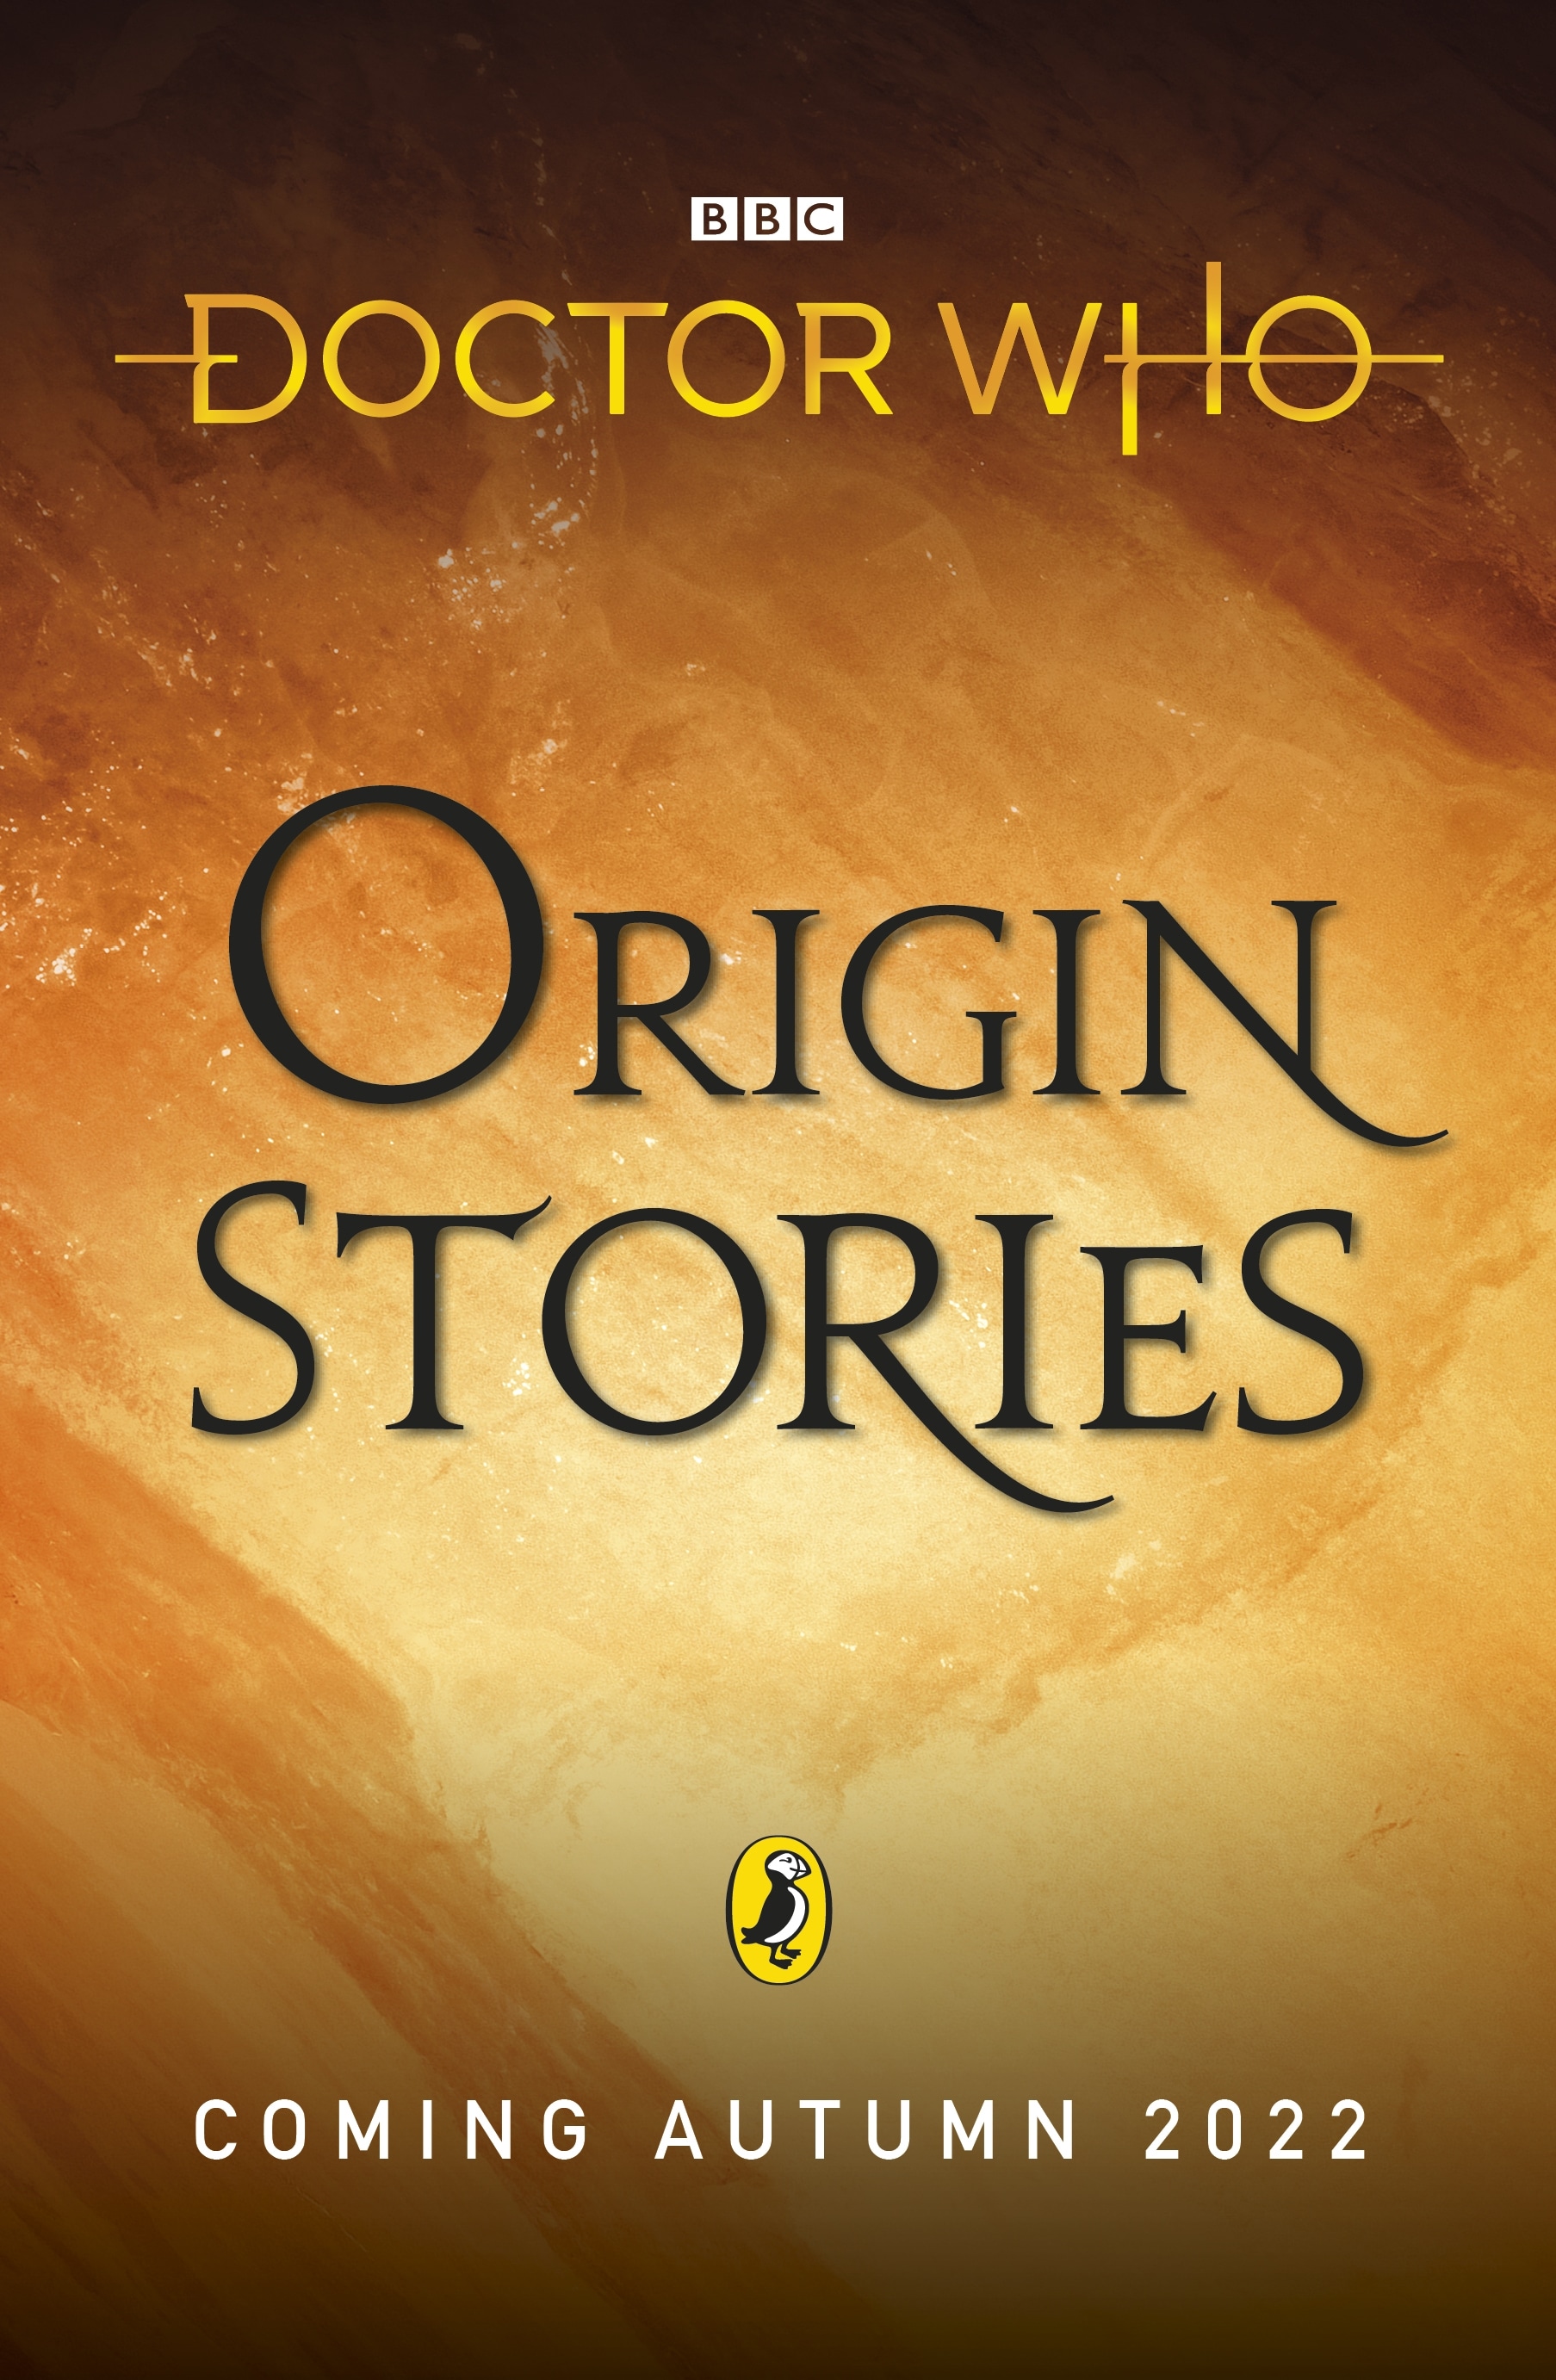 Book “Doctor Who: Origin Stories” by Doctor Who — August 18, 2022